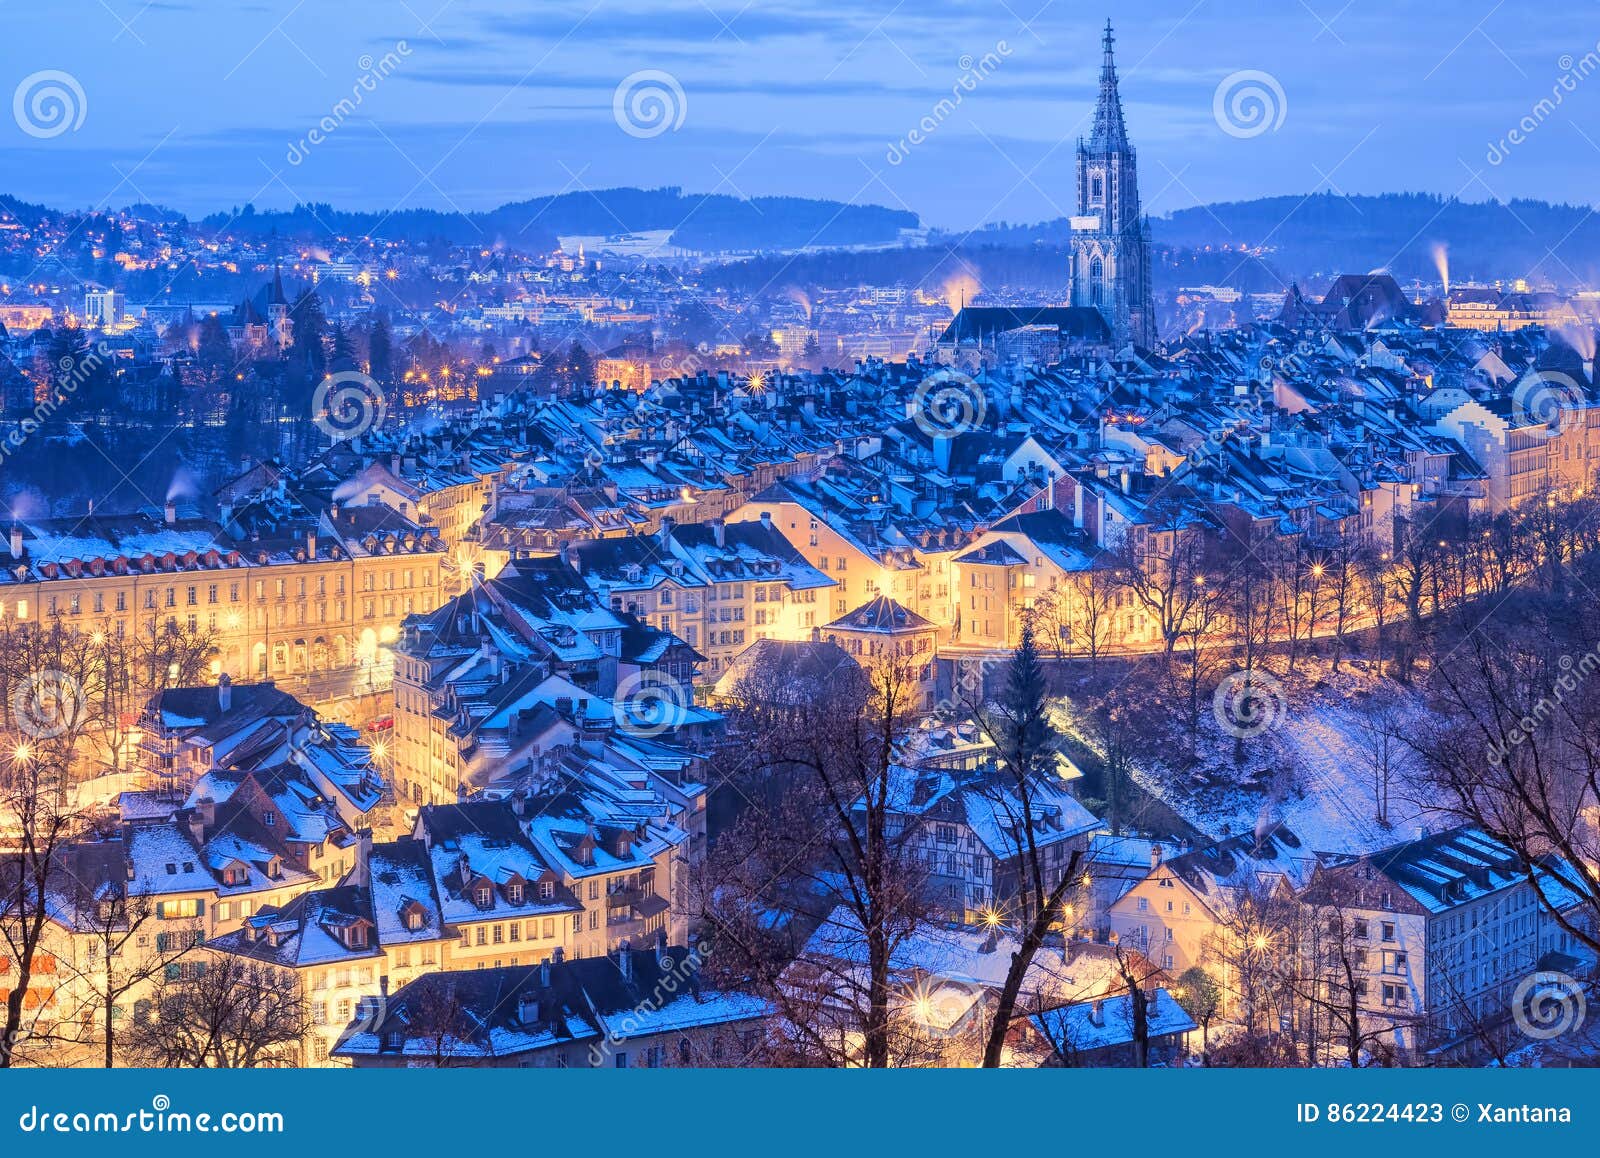 bern old town snow covered in winter, switzerland